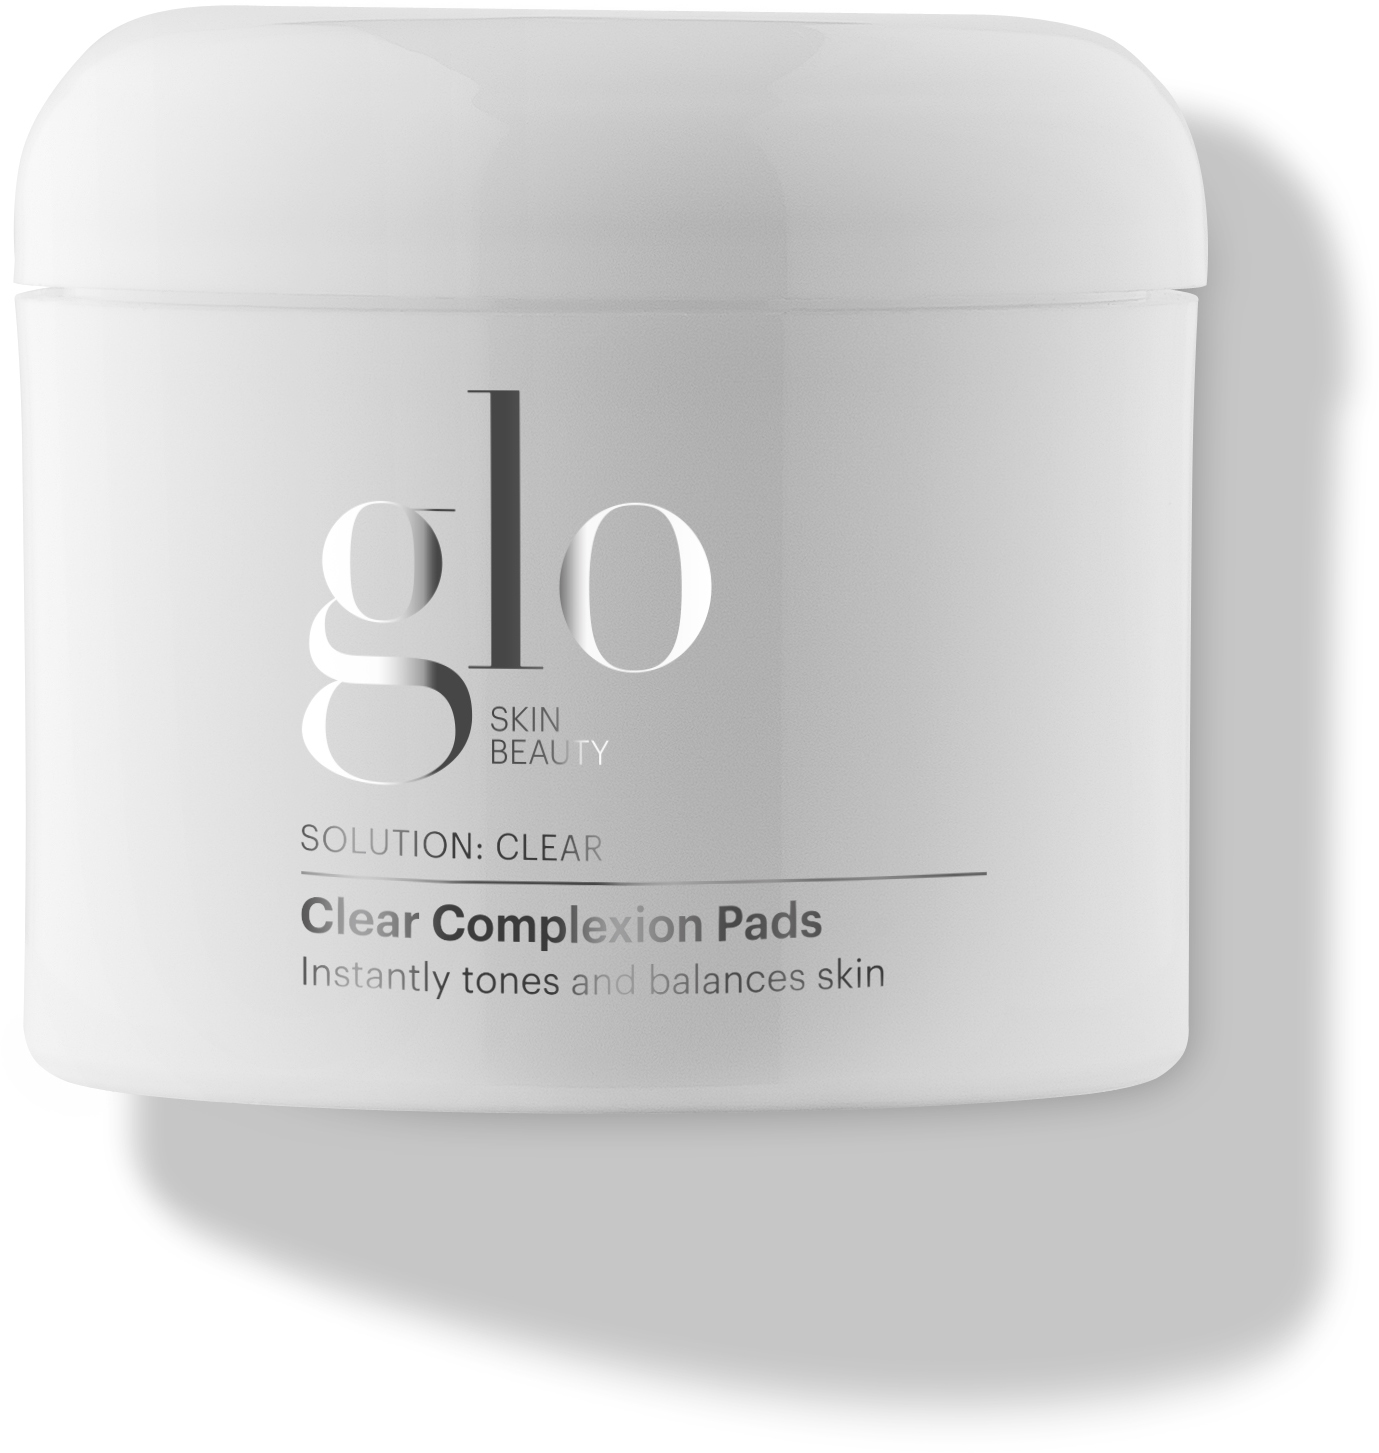 gloTherapeutics Clear Complexion Pads 50st